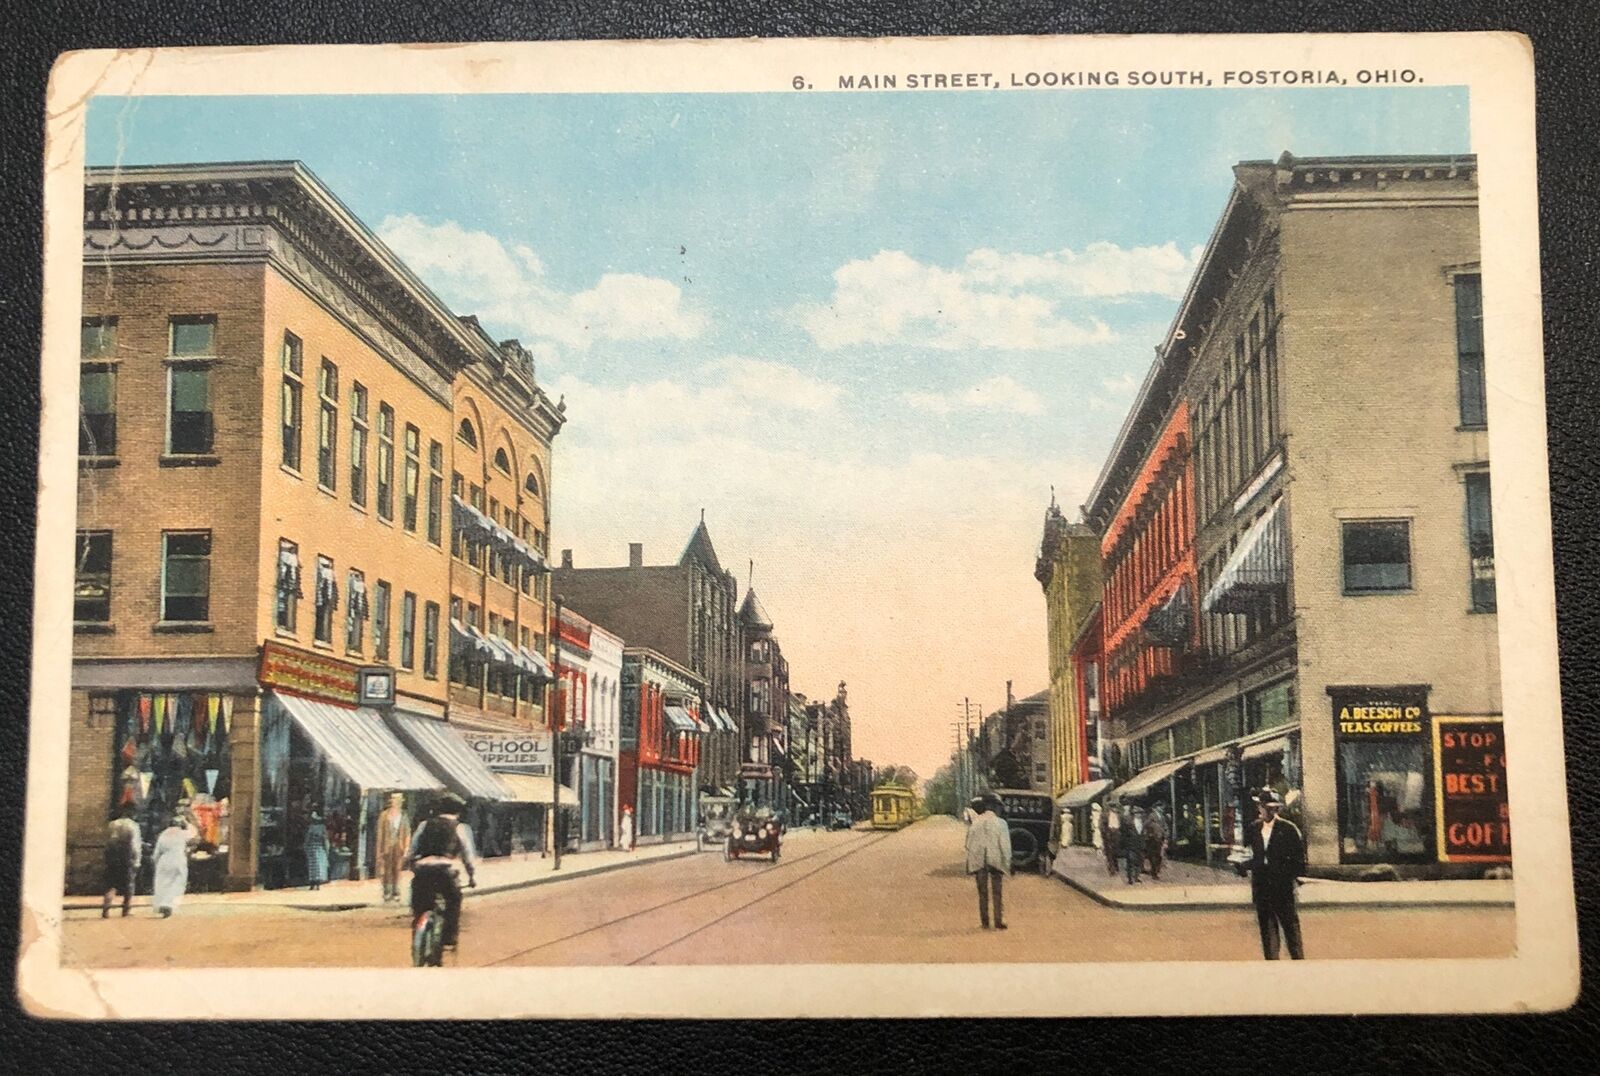 Main Street Looking South Fostoria Oh Ohio Town View Vintage Postcard MM6